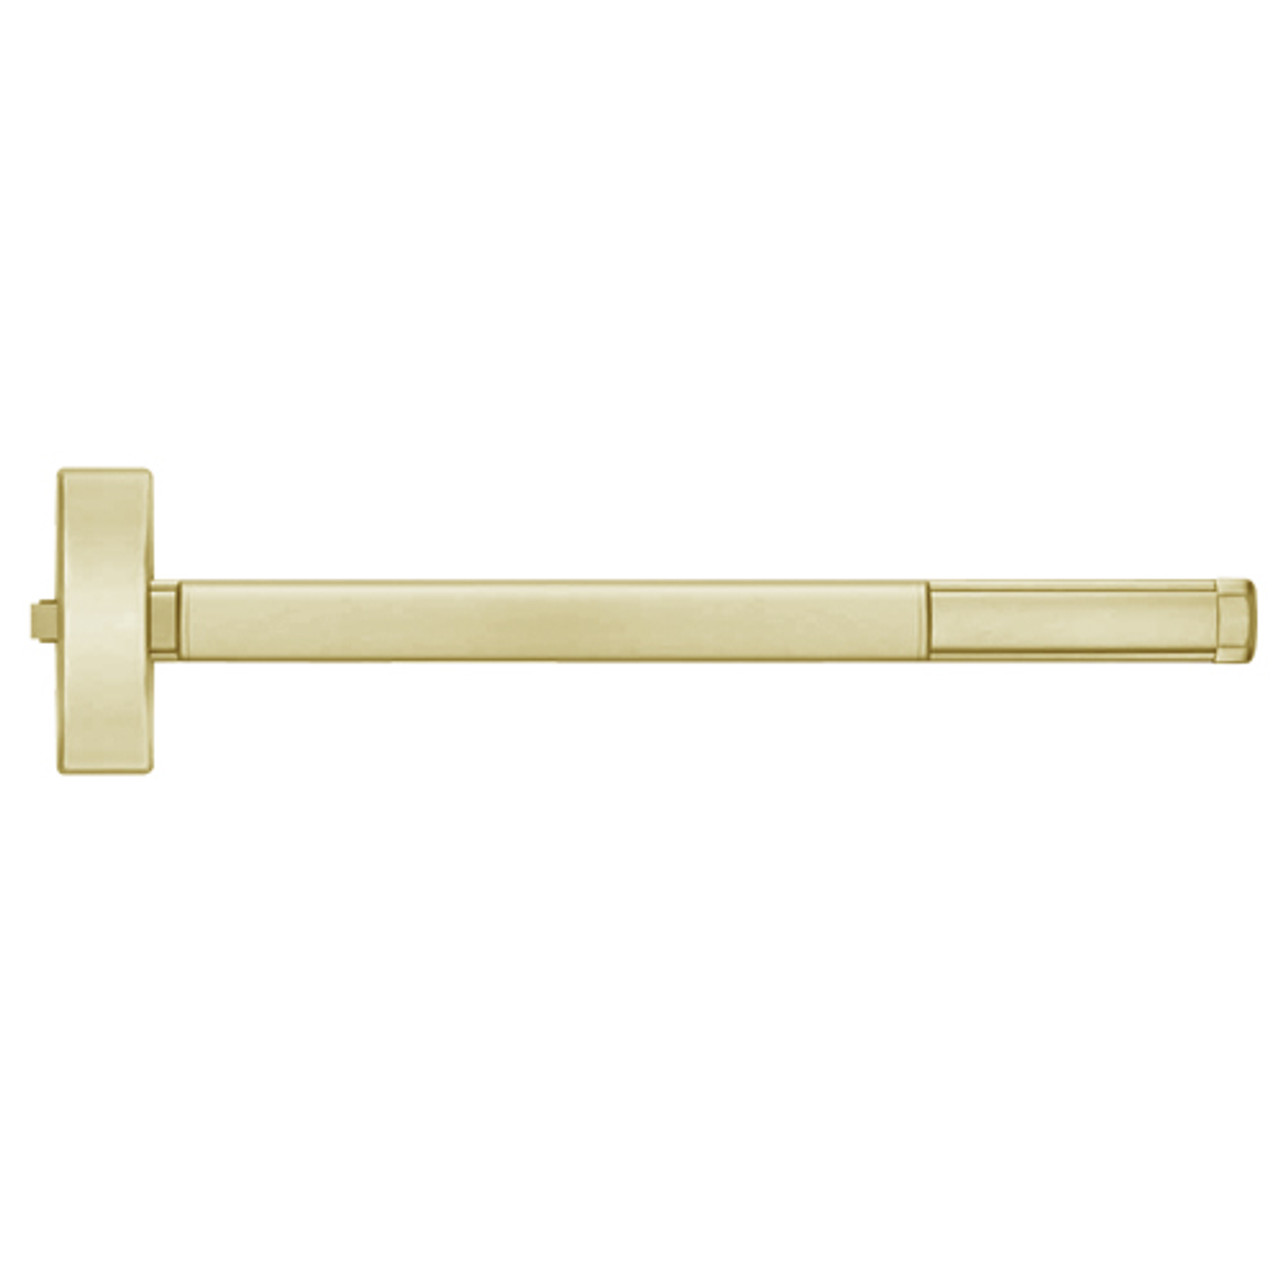 TS2114-606-36 PHI 2100 Series Non Fire Rated Apex Rim Exit Device with Touchbar Monitoring Switch Prepped for Lever-Knob Always Active in Satin Brass Finish